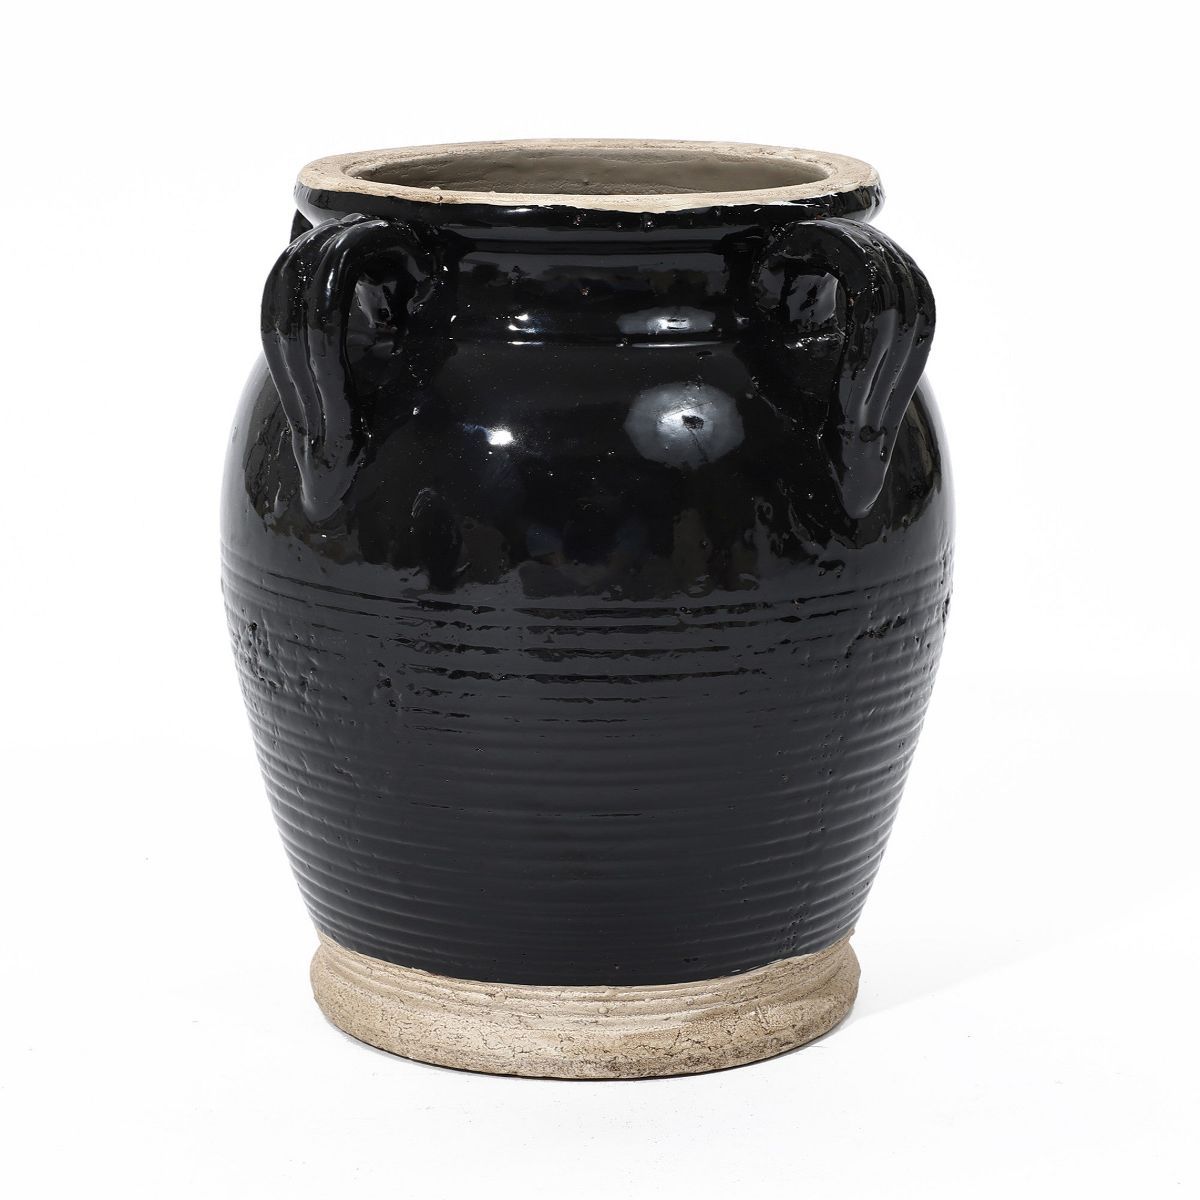 LuxenHome Black Jug Round Terracotta Vase with Two Handles | Target